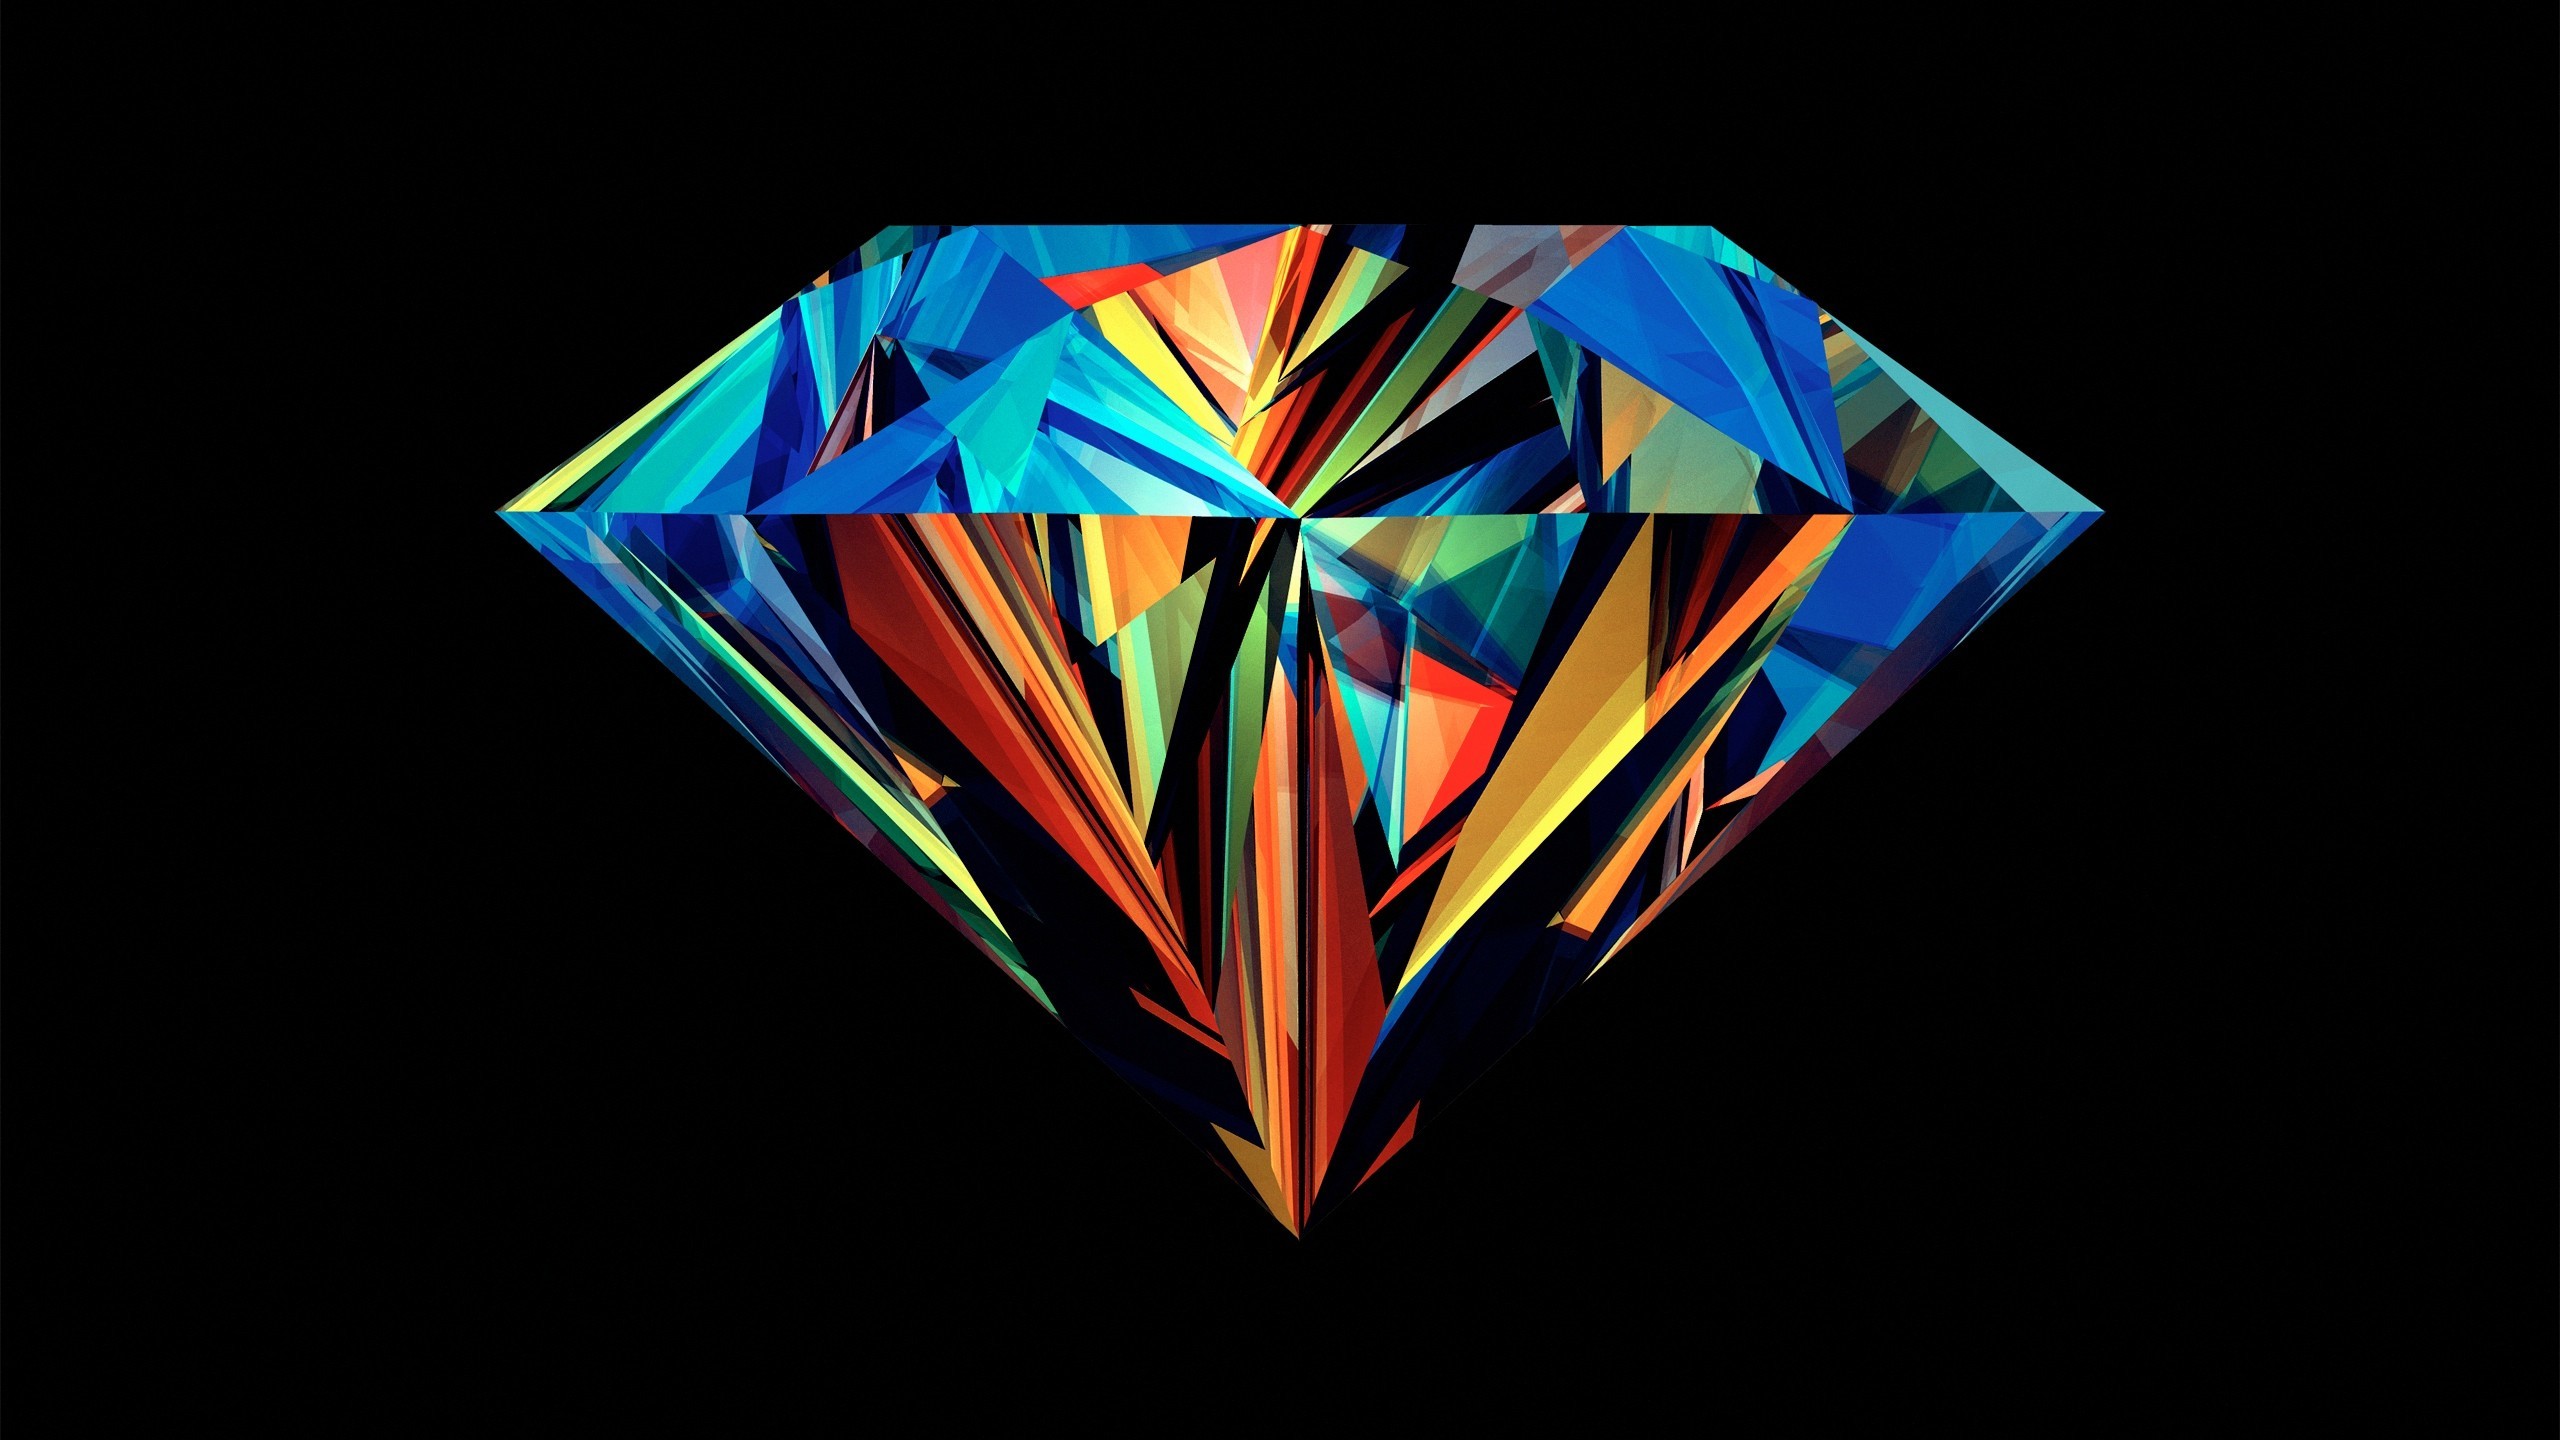 View, download, comment, and rate this Diamond Wallpaper –  Wallpaper Abyss